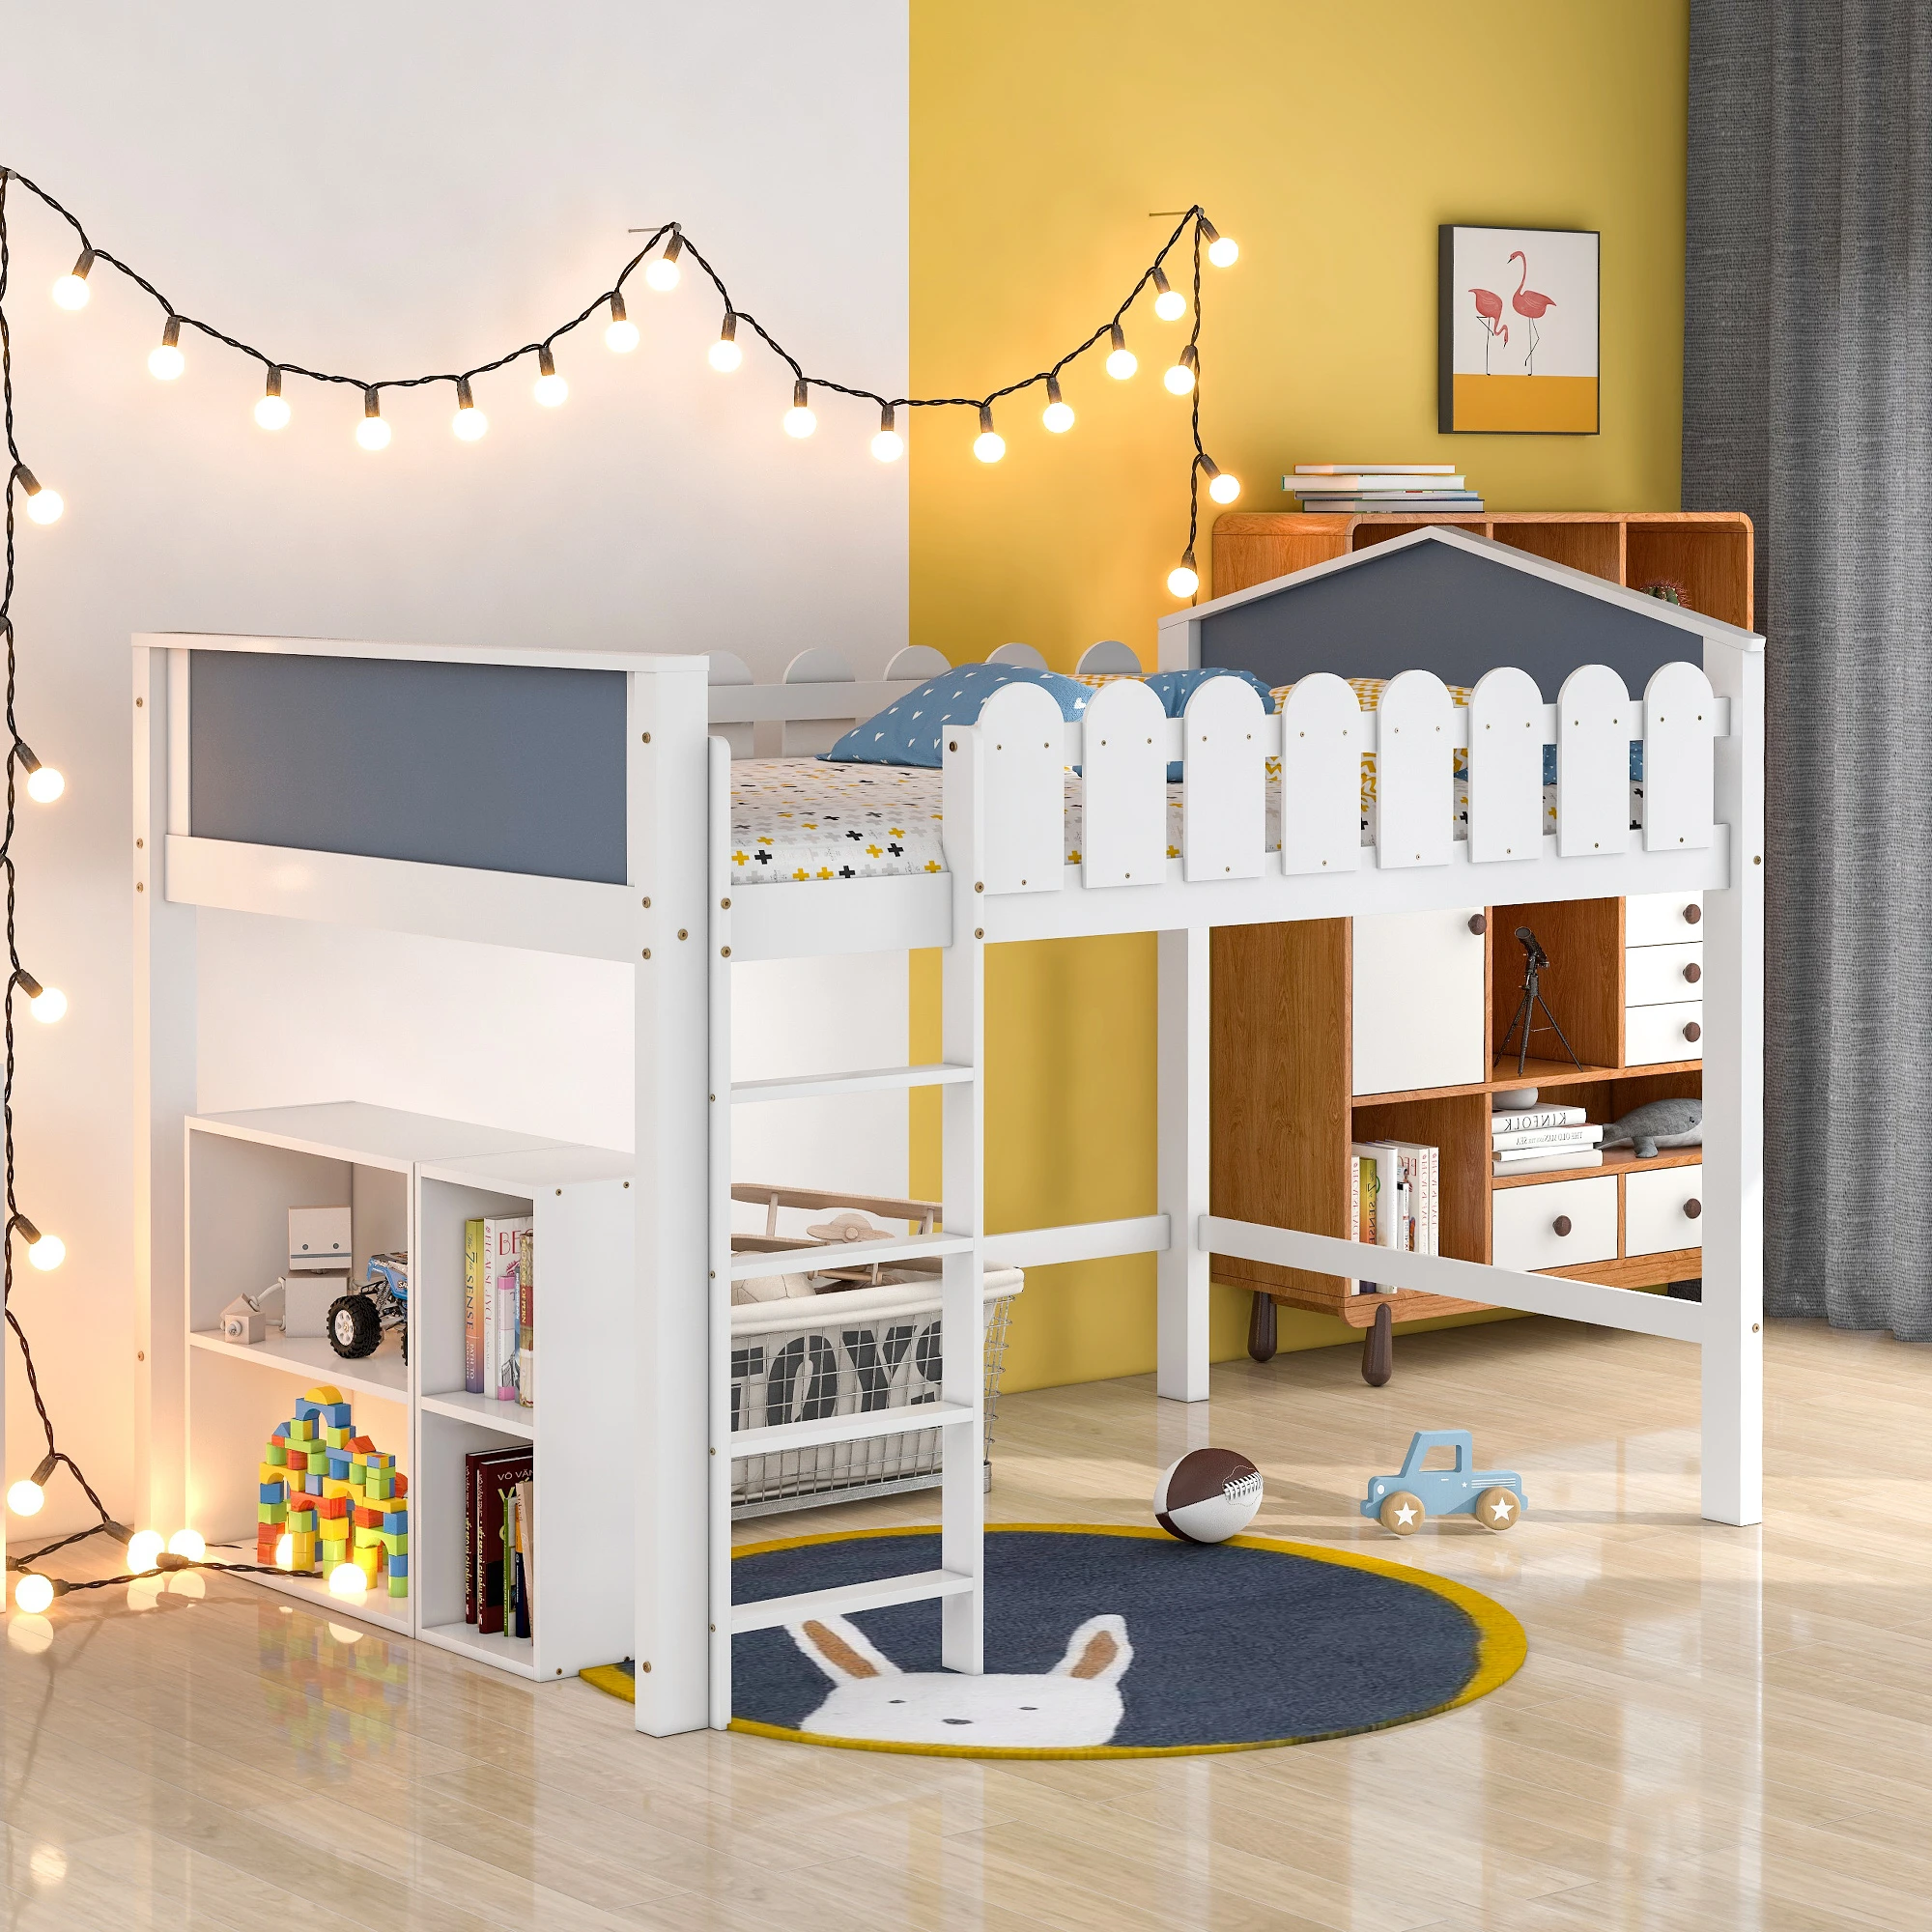 Cot Loft Bed / Children's Bunk Bed Bed Frame With Storage Cupboard White Pine With Slatted Frame 120 200 Cm - Bed Bases & Frames - AliExpress